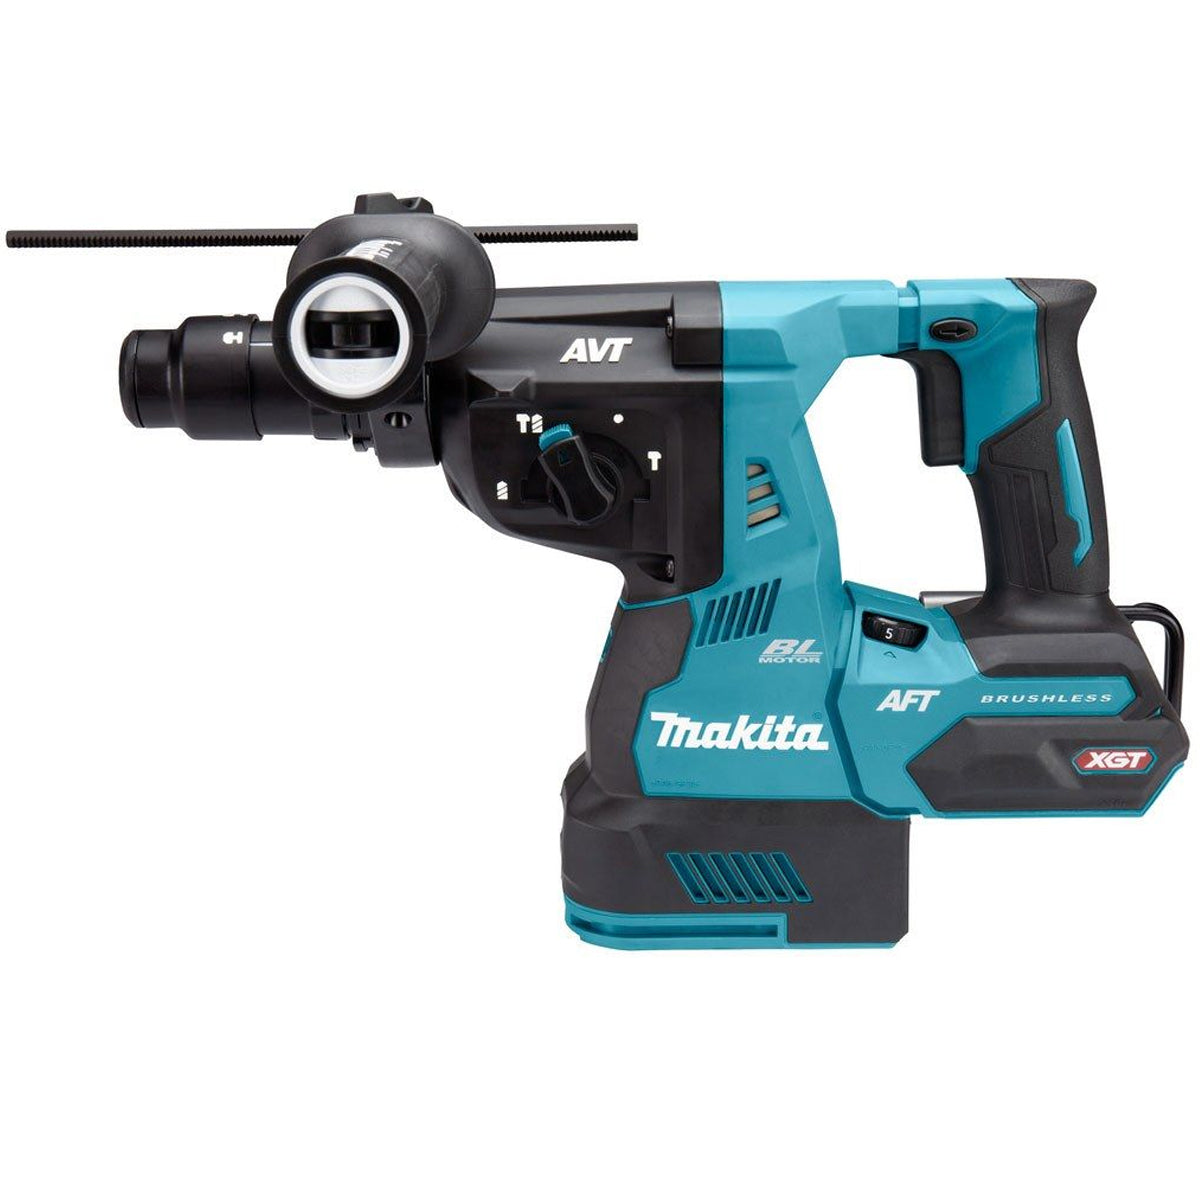 Makita HR003GZ 40V Brushless SDS+ Rotary Hammer Drill With 1 x 2.5Ah Battery Charger & Bag